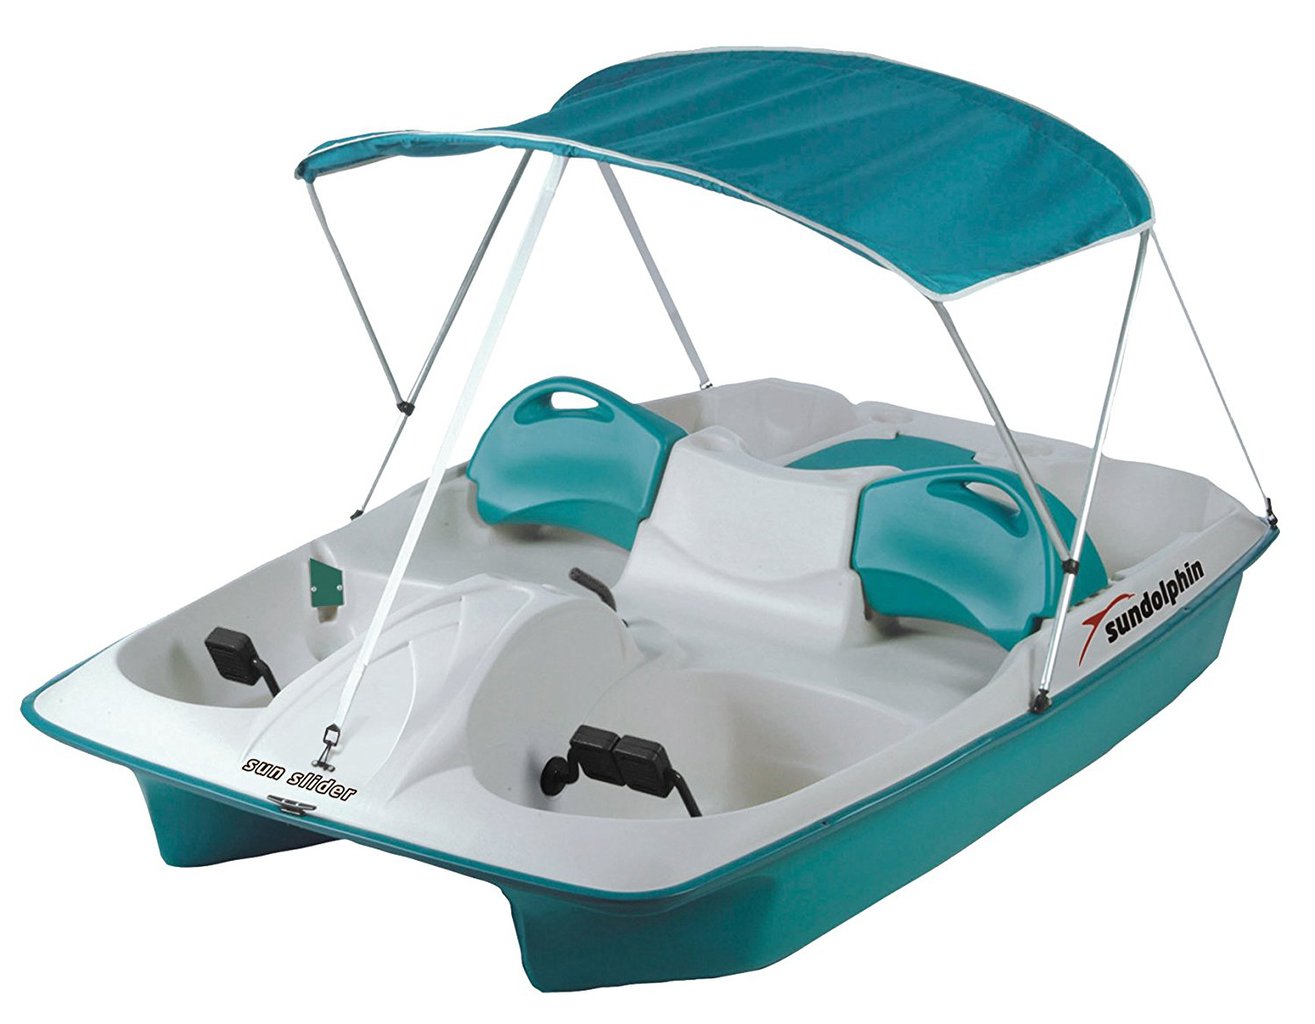 Sun Dolphin Pedal Boat with Canopy